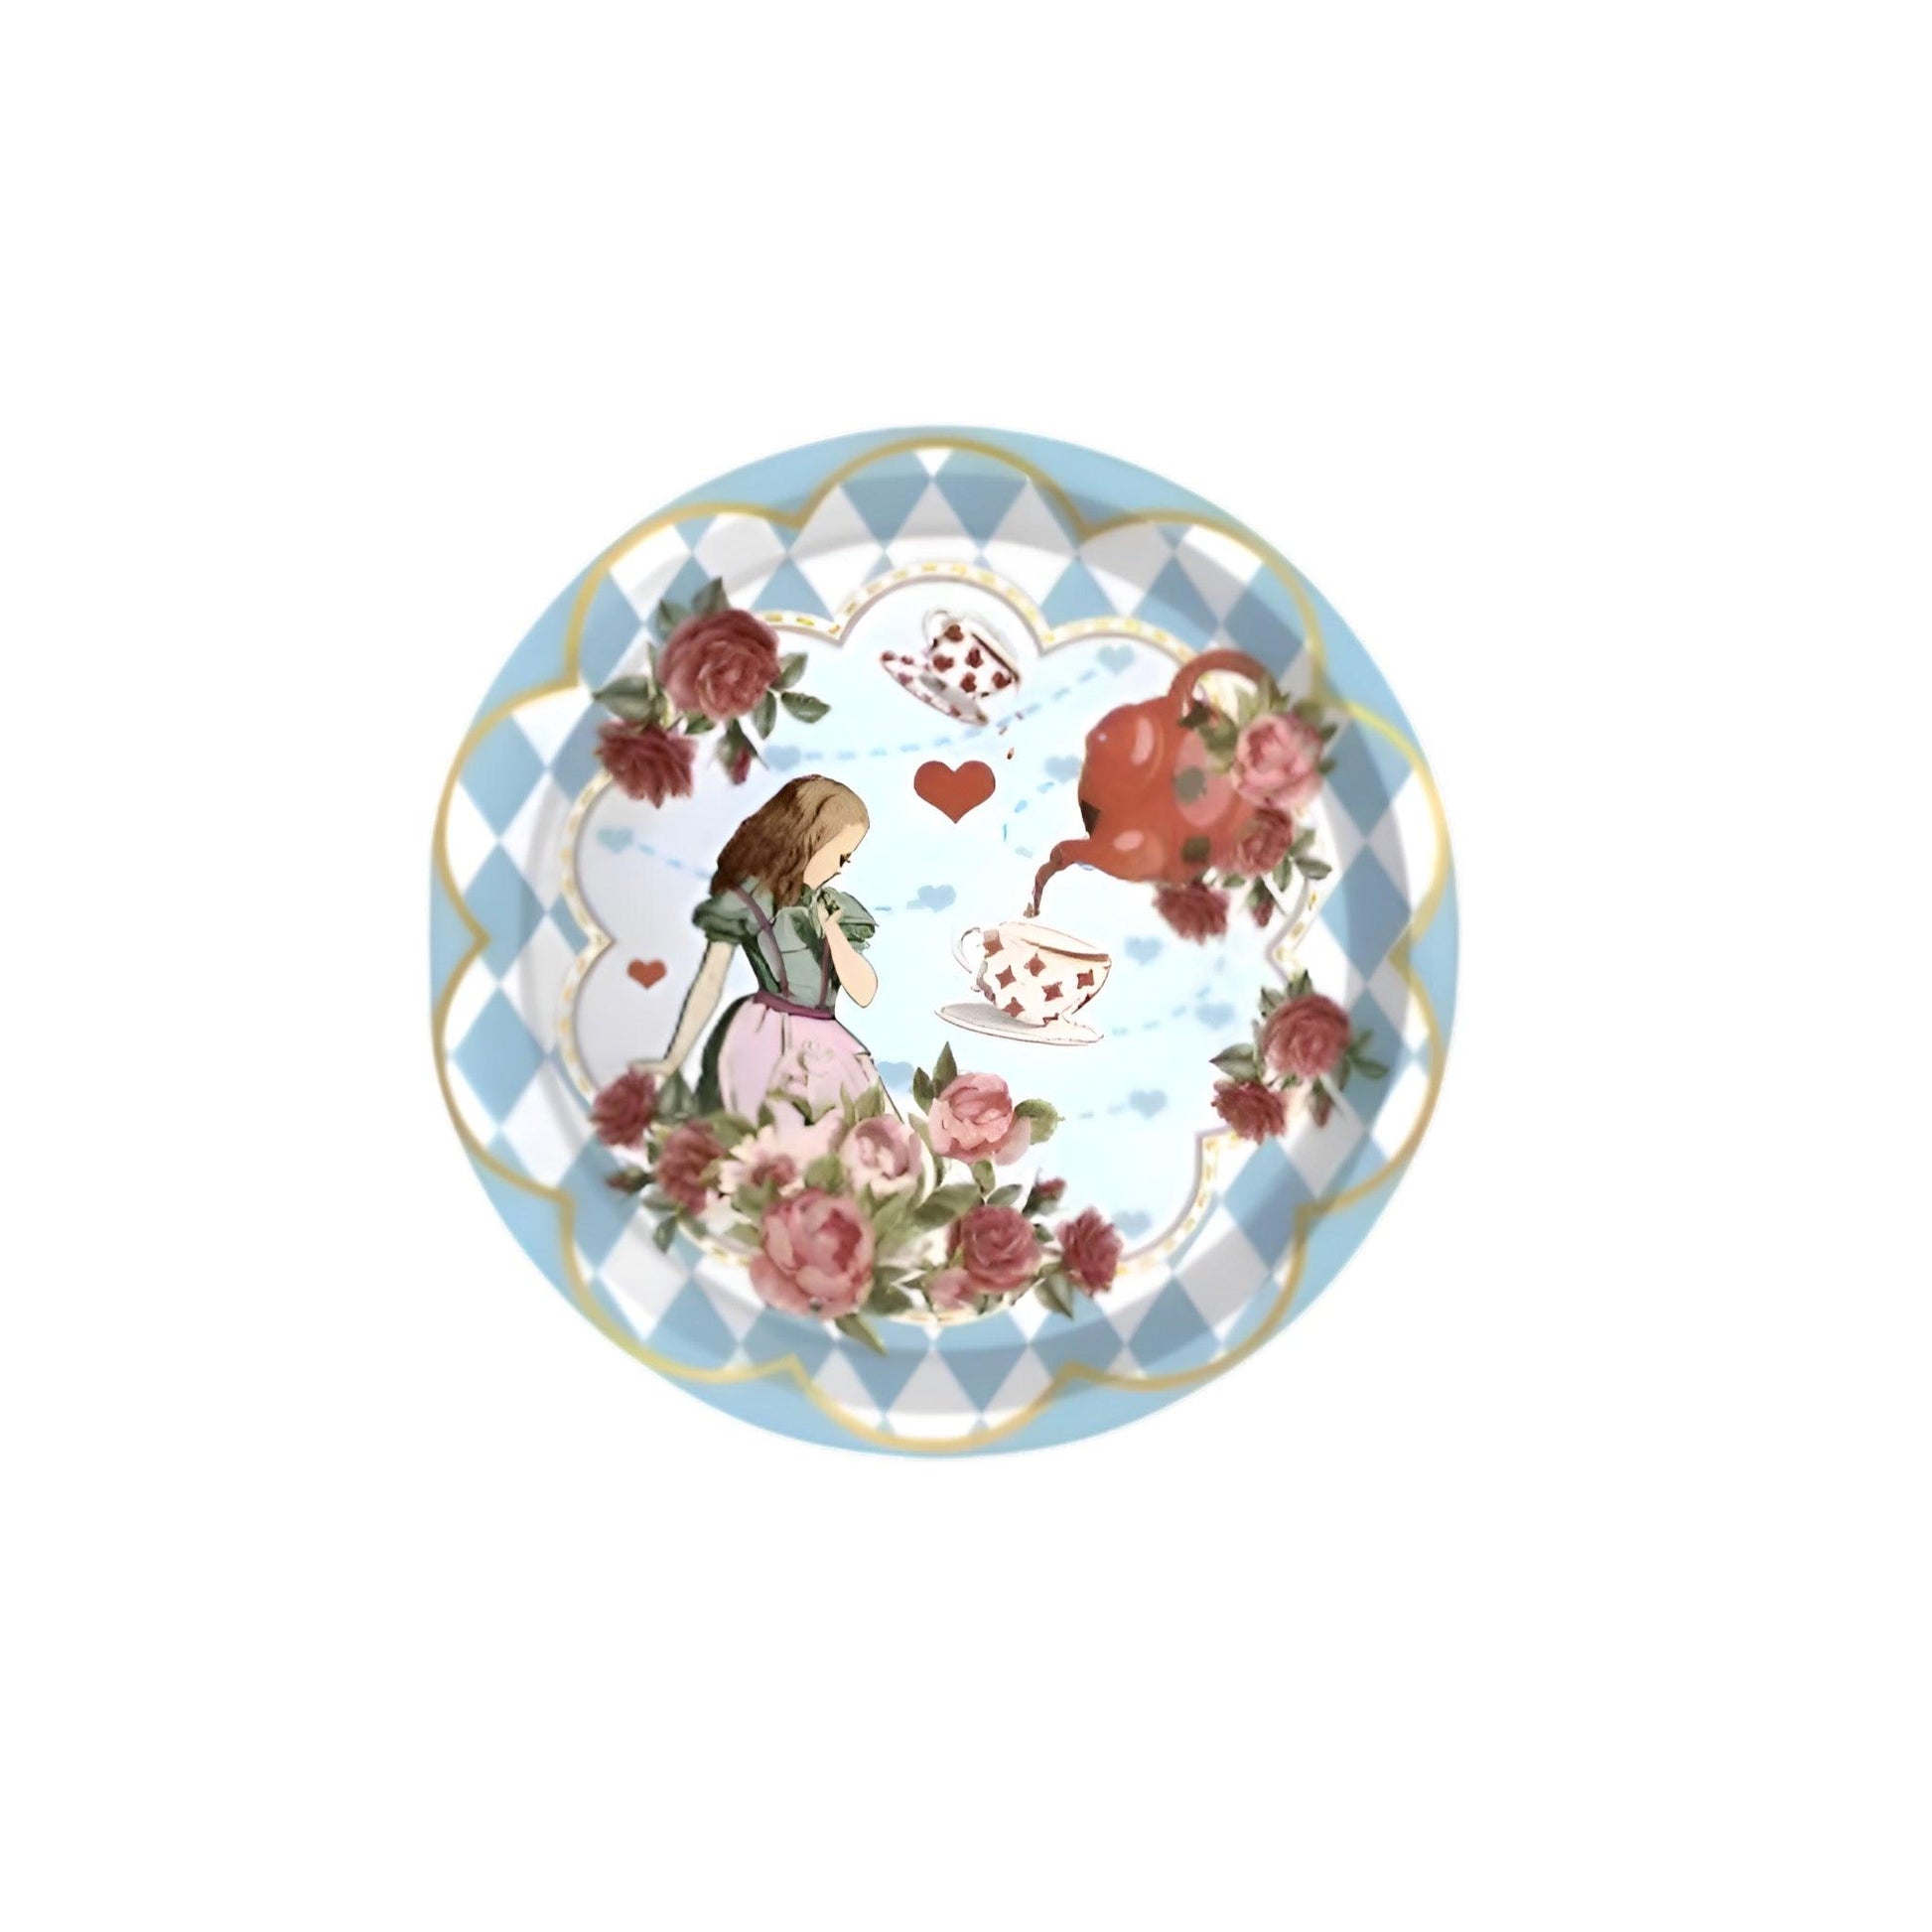 Blue Alice in Wonderland plate with blue diamond border and featuring Alice and red teacups.